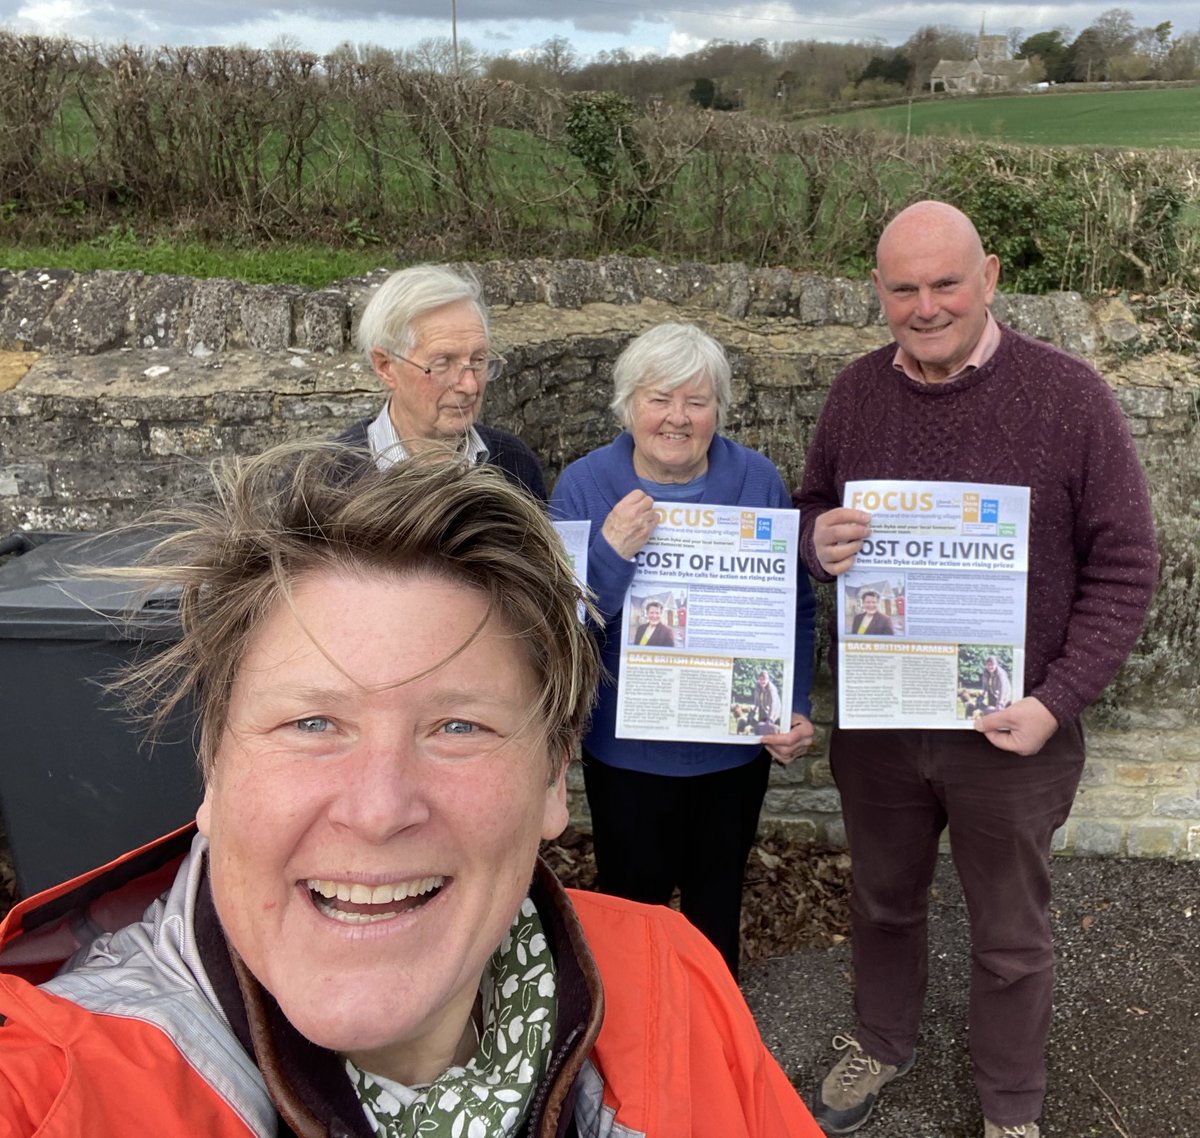 Great day in #ChaltonAdam #Somerset so many people are really angry that they don’t have proper representation in Parliament and they want change. They are backing me to be that change. 
#demandbetter #forafairdeal #generalelectionnow 
@SomersetLibDems @SF_LibDems